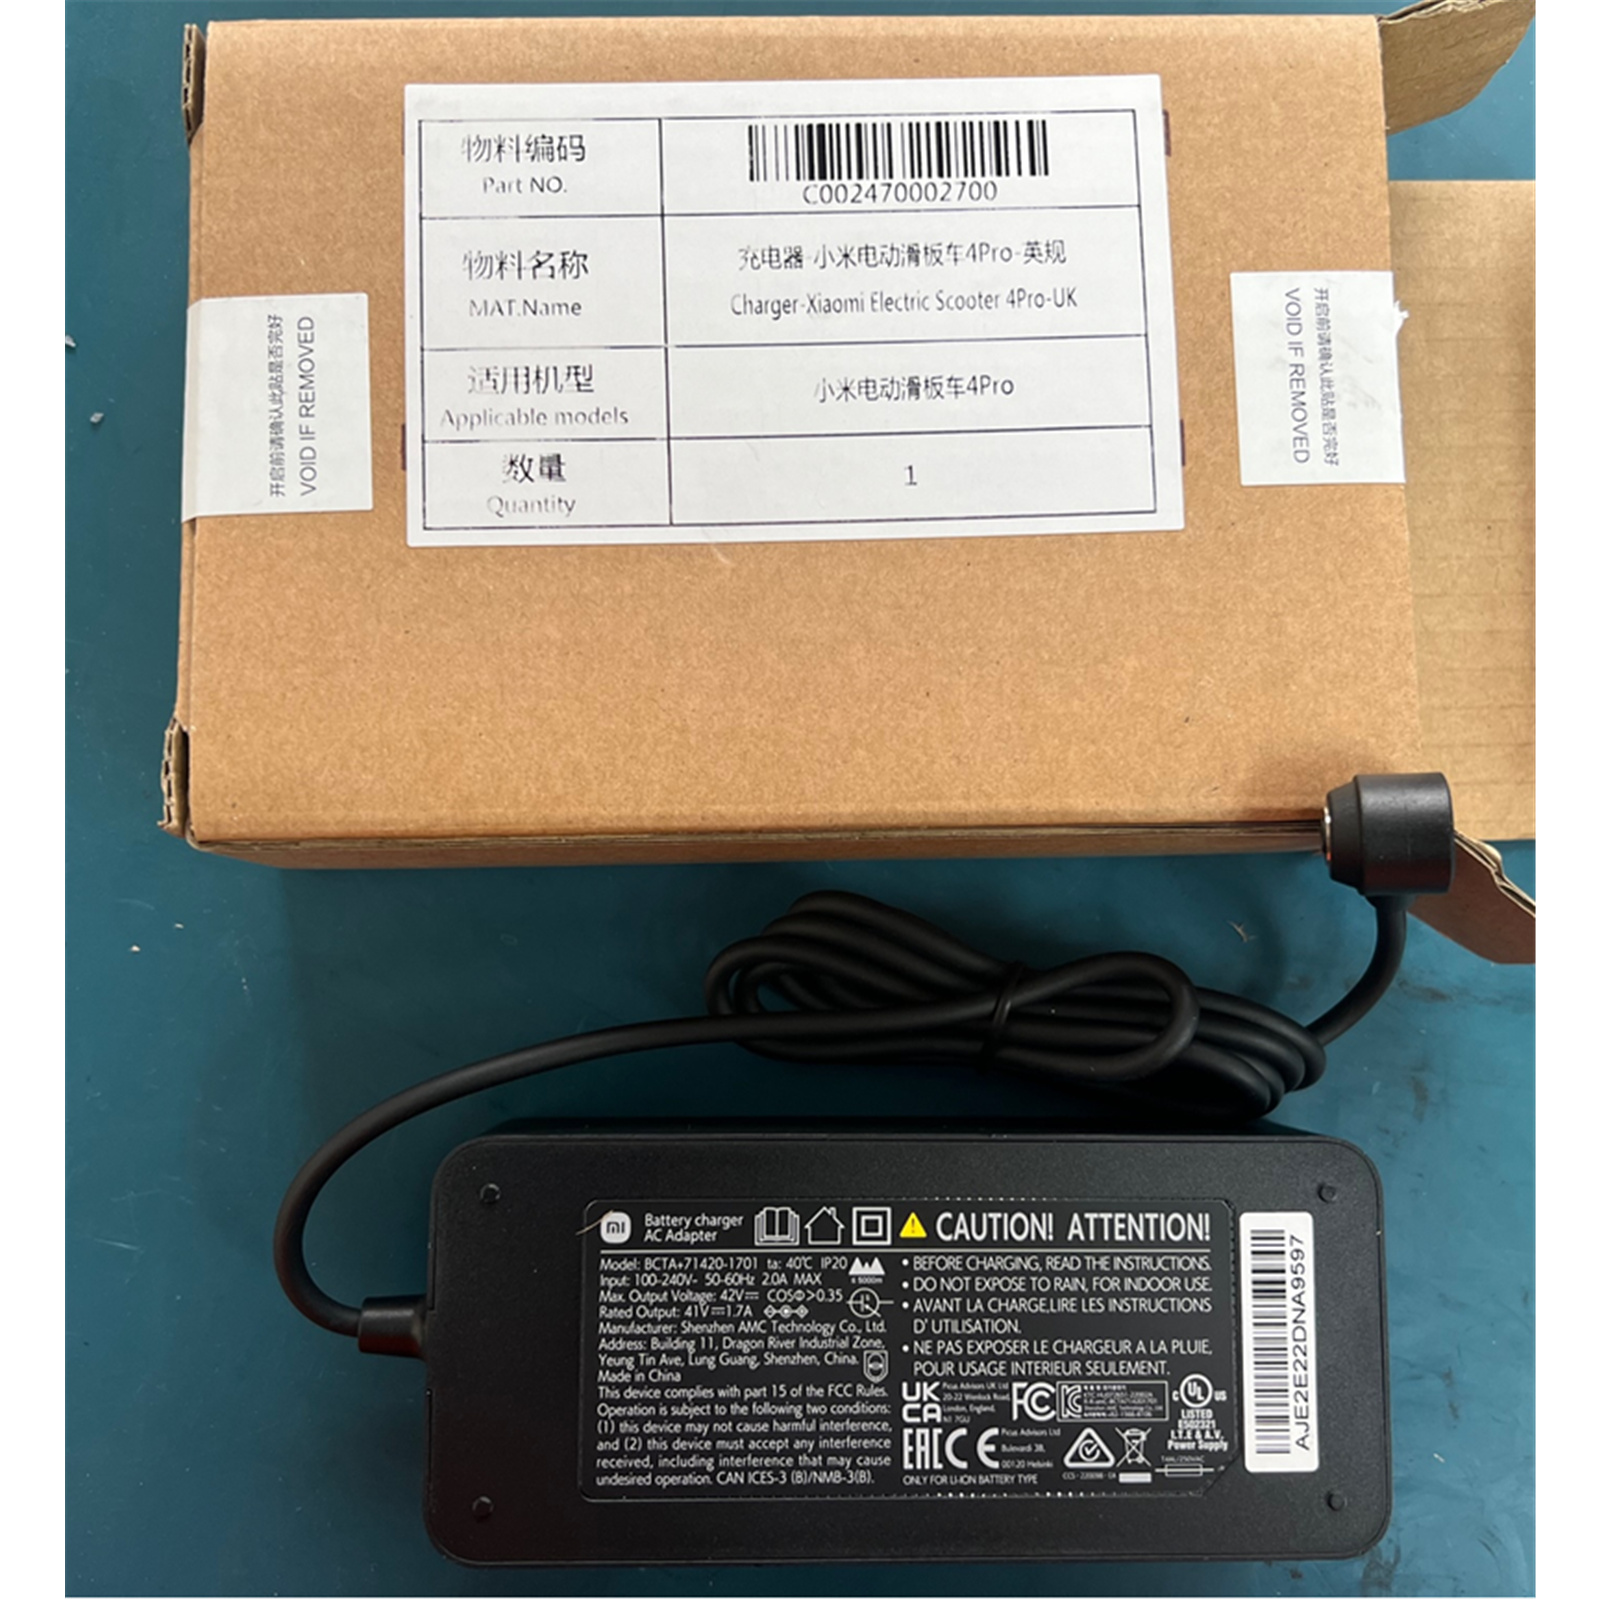 Buy the Xiaomi Original BCTA+71420-1701 Scooter Power Charger 41V 1.7A -  For... ( C002470002700 ) online - PBTech.com/pacific